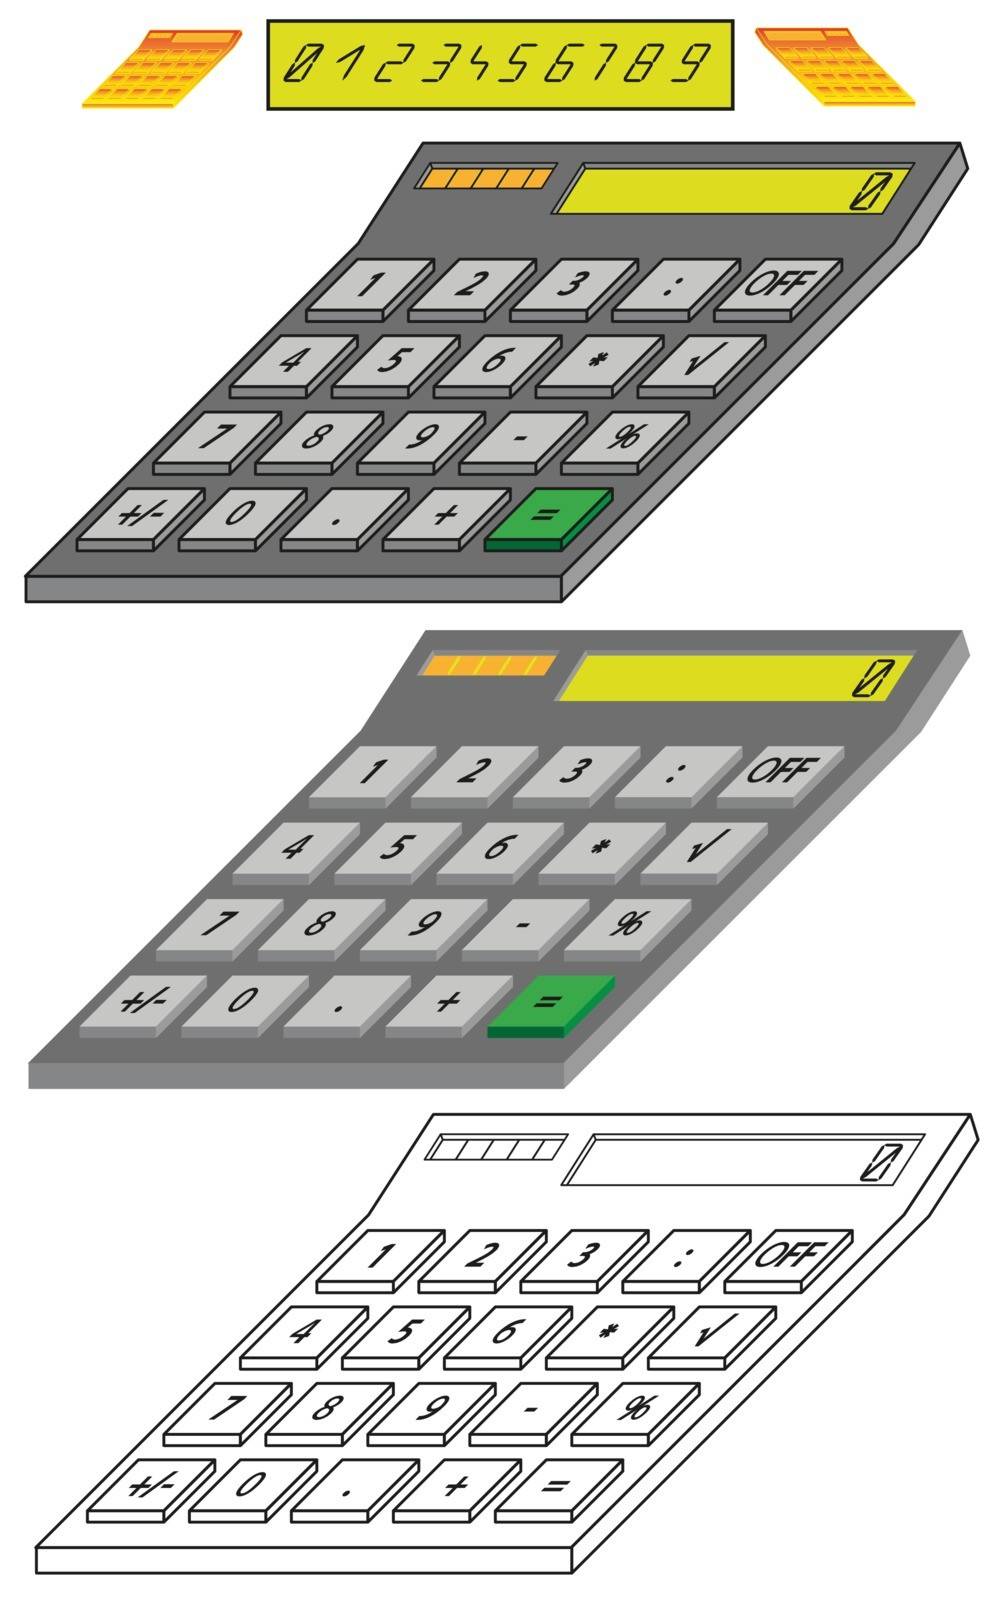 Illustration of digital calculator with big liquid crystal display, solar panel and functional buttons.There is a 
range of numbers from 0 to 9 that you can use to customize the display results.